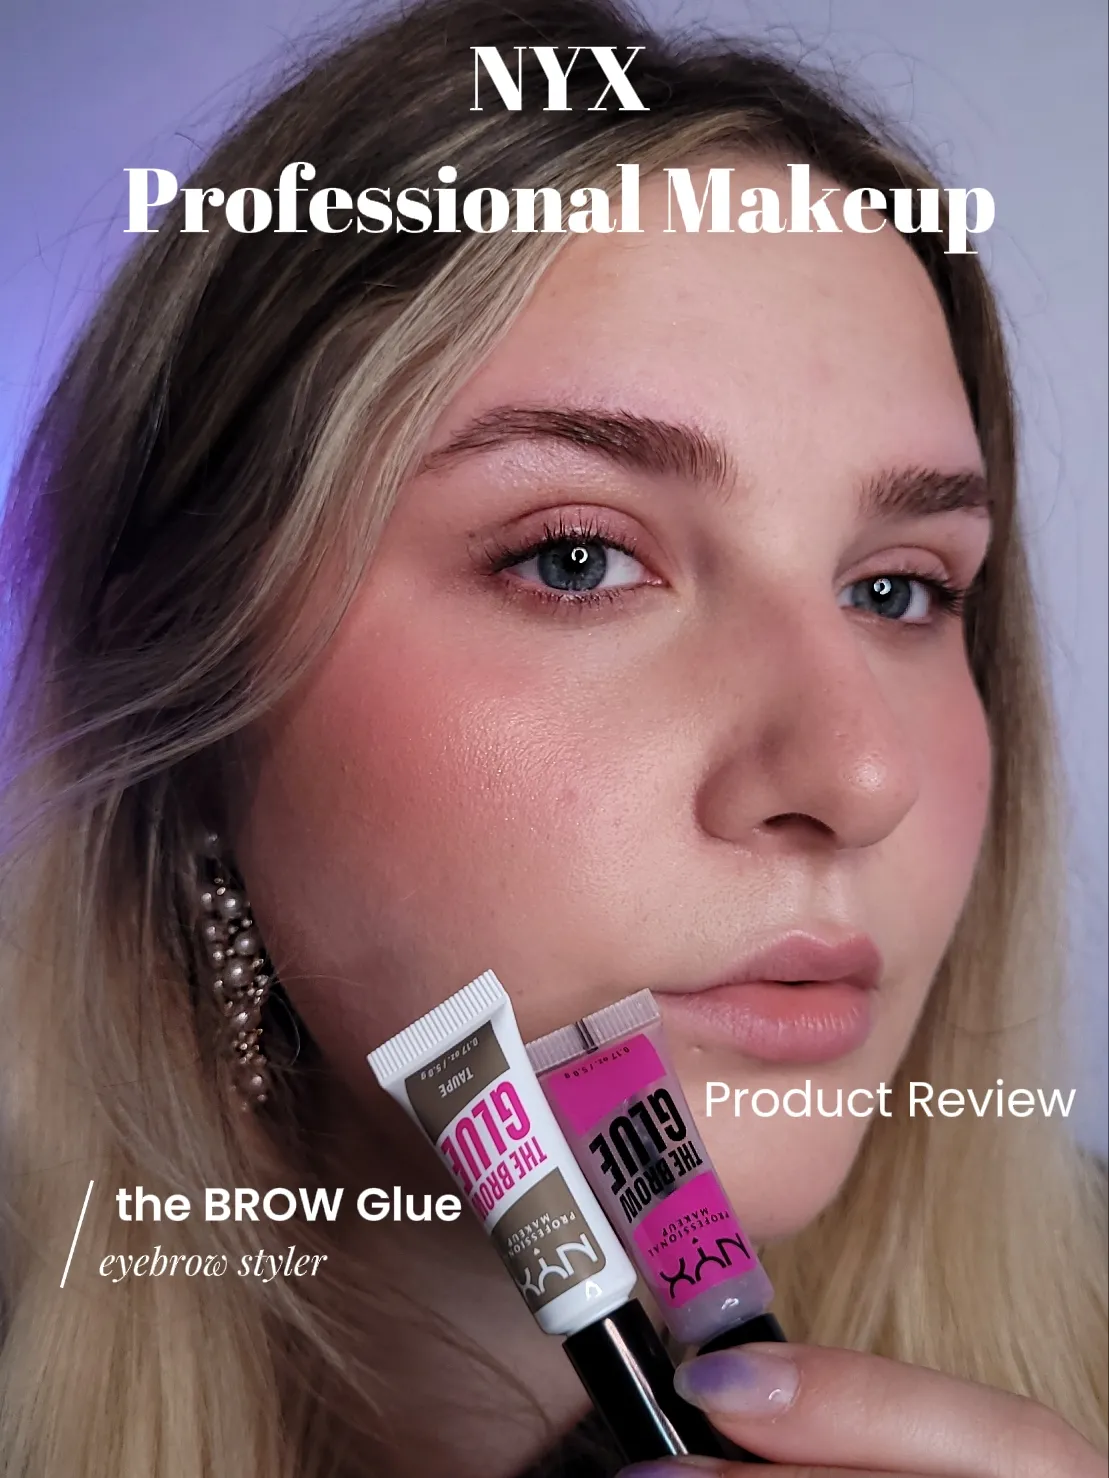 NYX Professional Makeup the brow glue review 🖤 | Gallery posted by Klaudia  | Lemon8